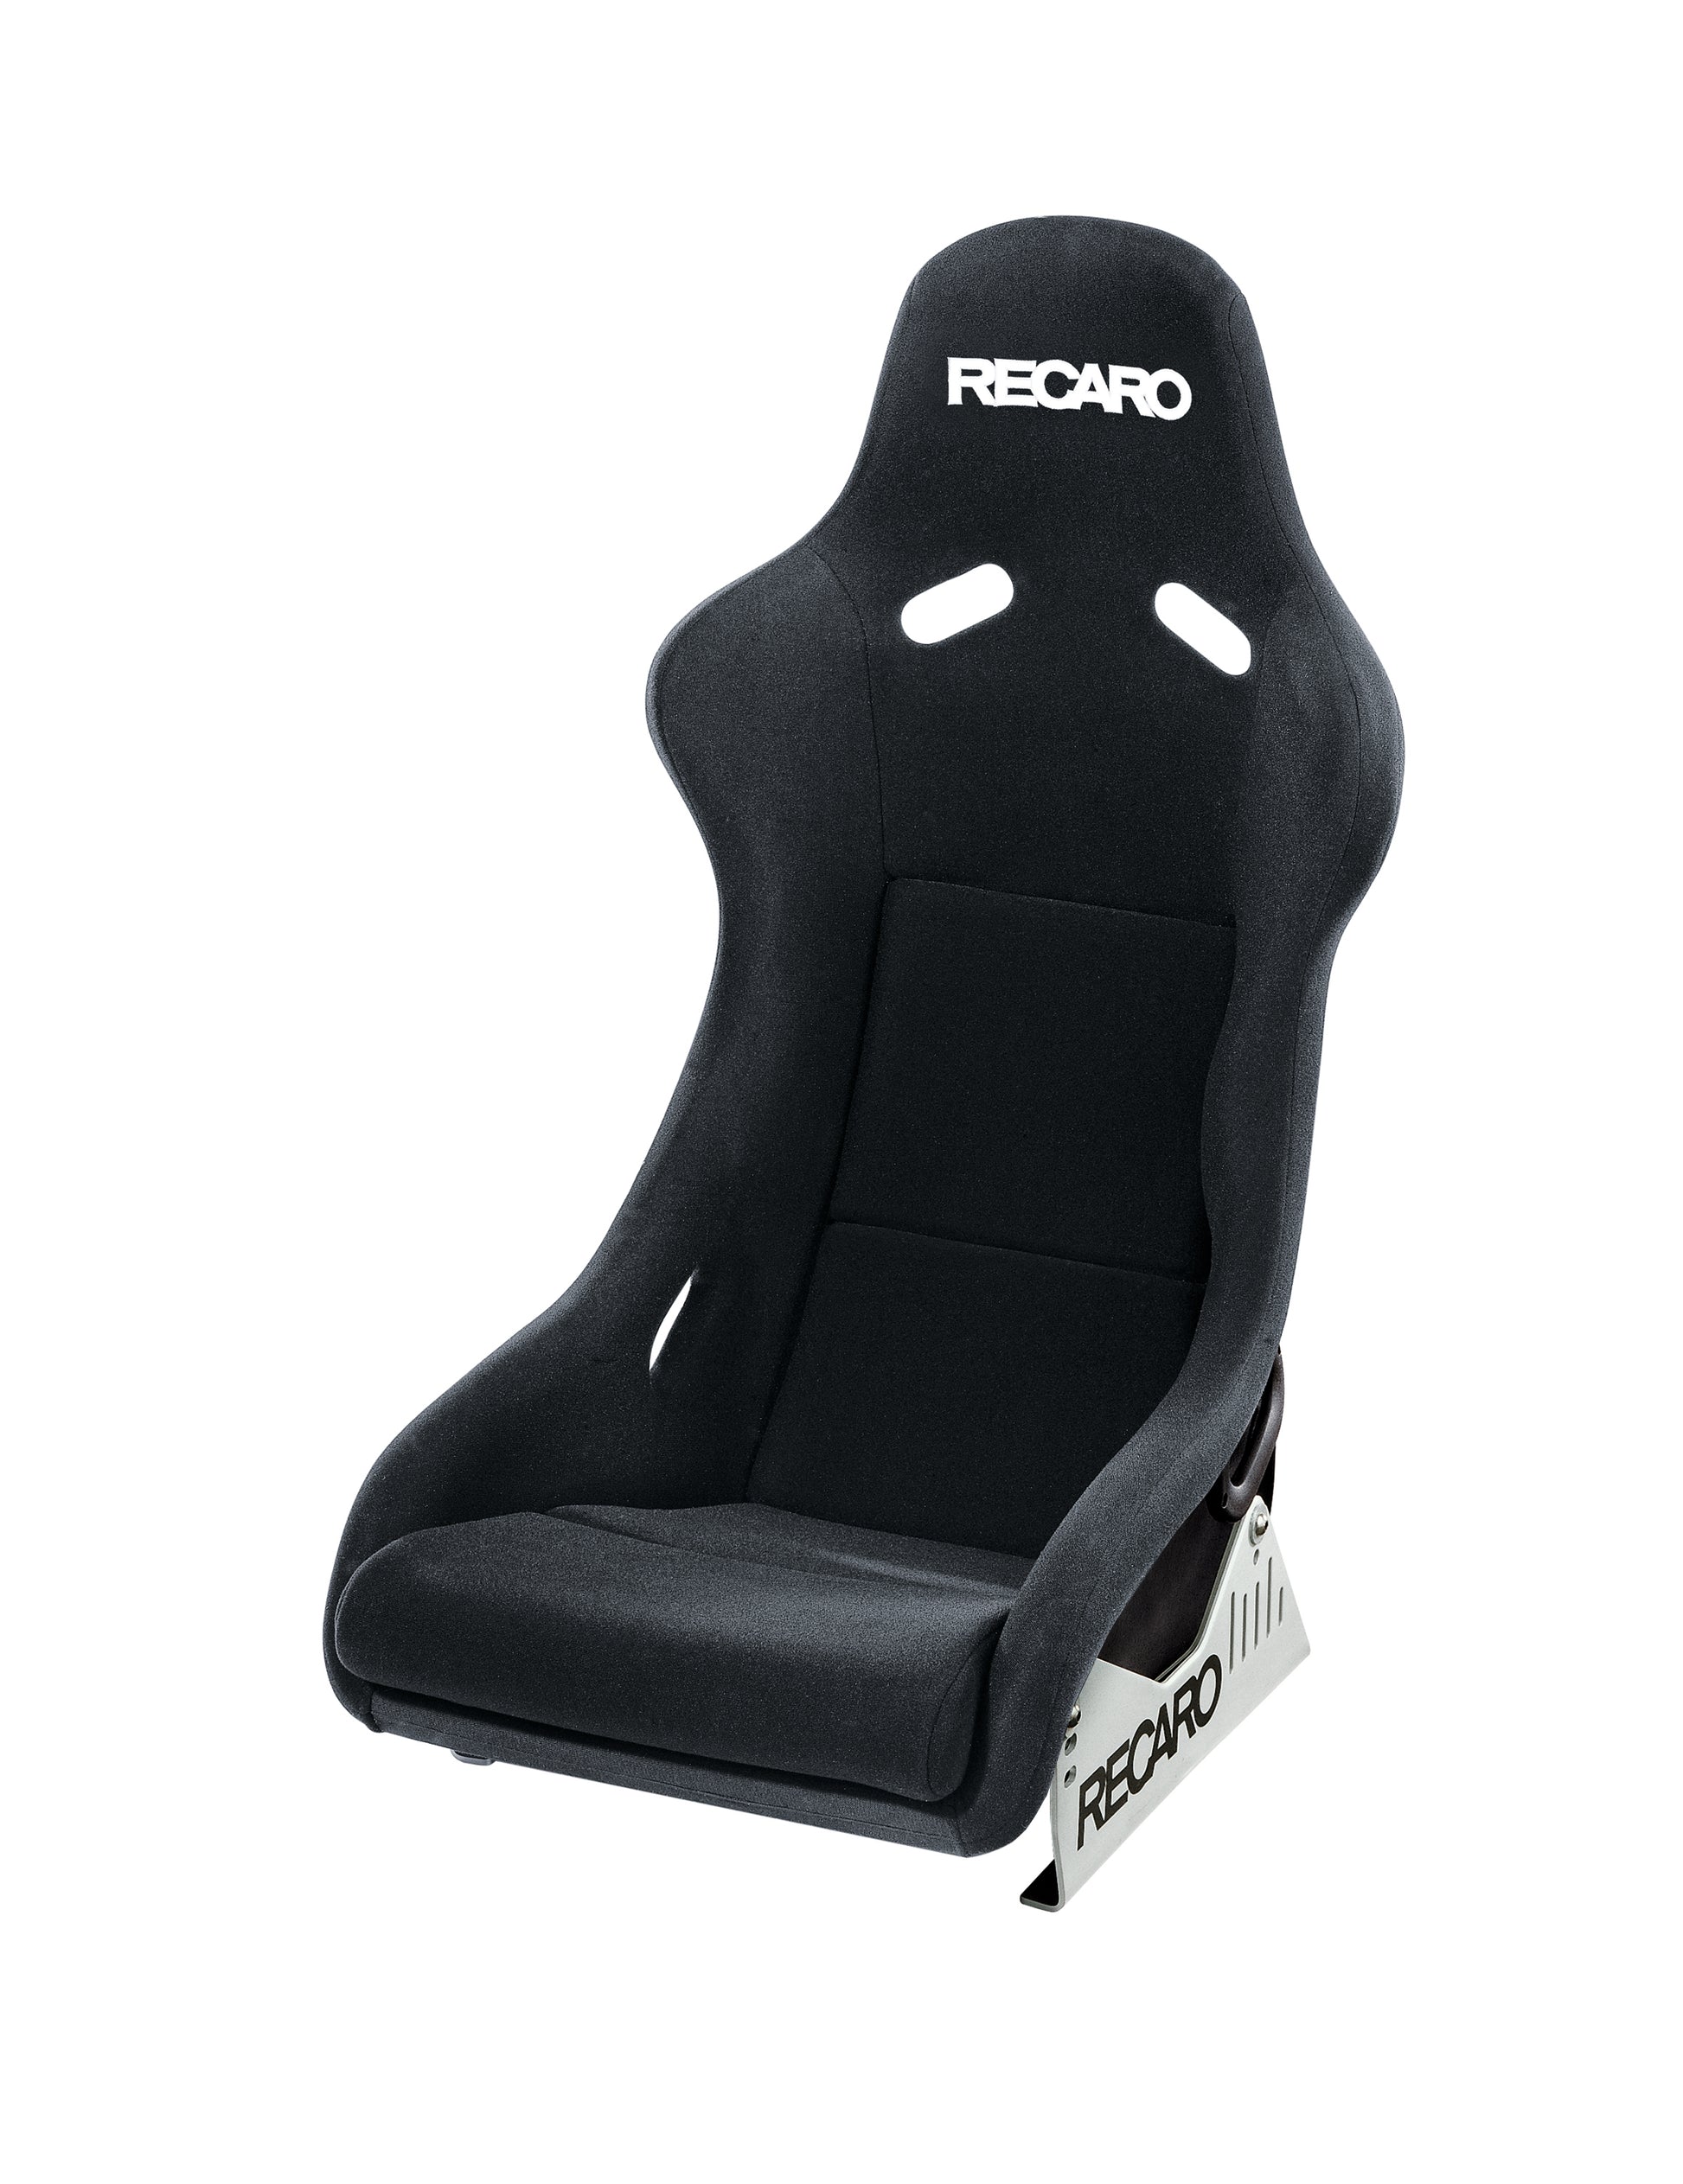 RECARO Pole Position Motorsport Seats Suitable for Australian Road Use with ABE Approval (ABE) - MODE Auto Concepts